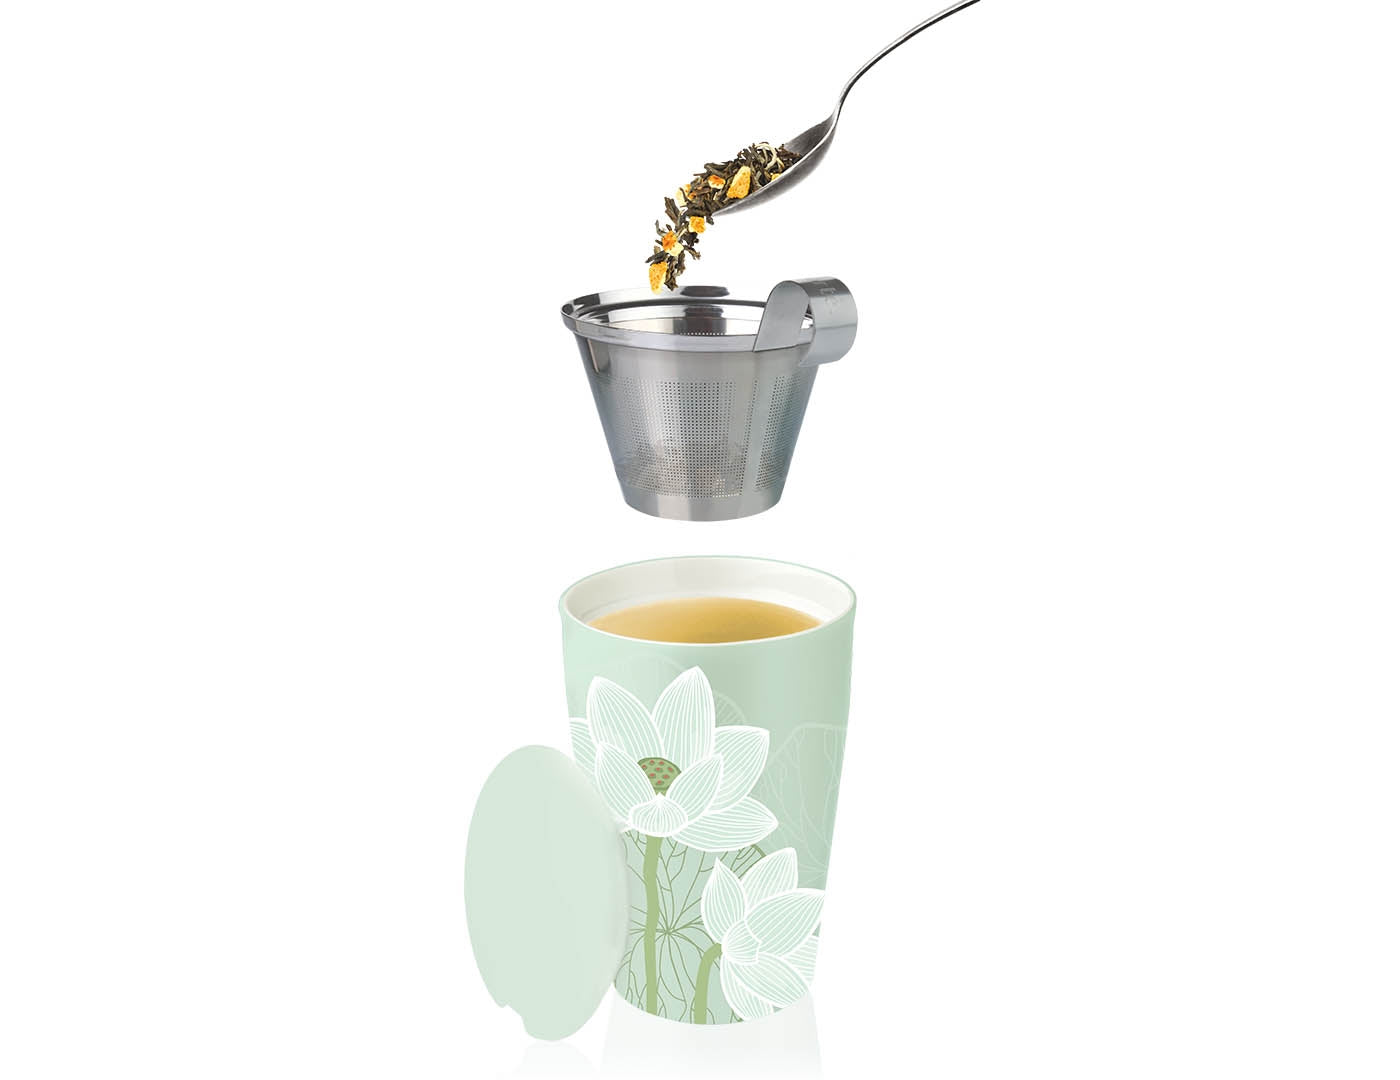 Lotus design KATI® Steeping cup with infuser showing stainless steel infuser